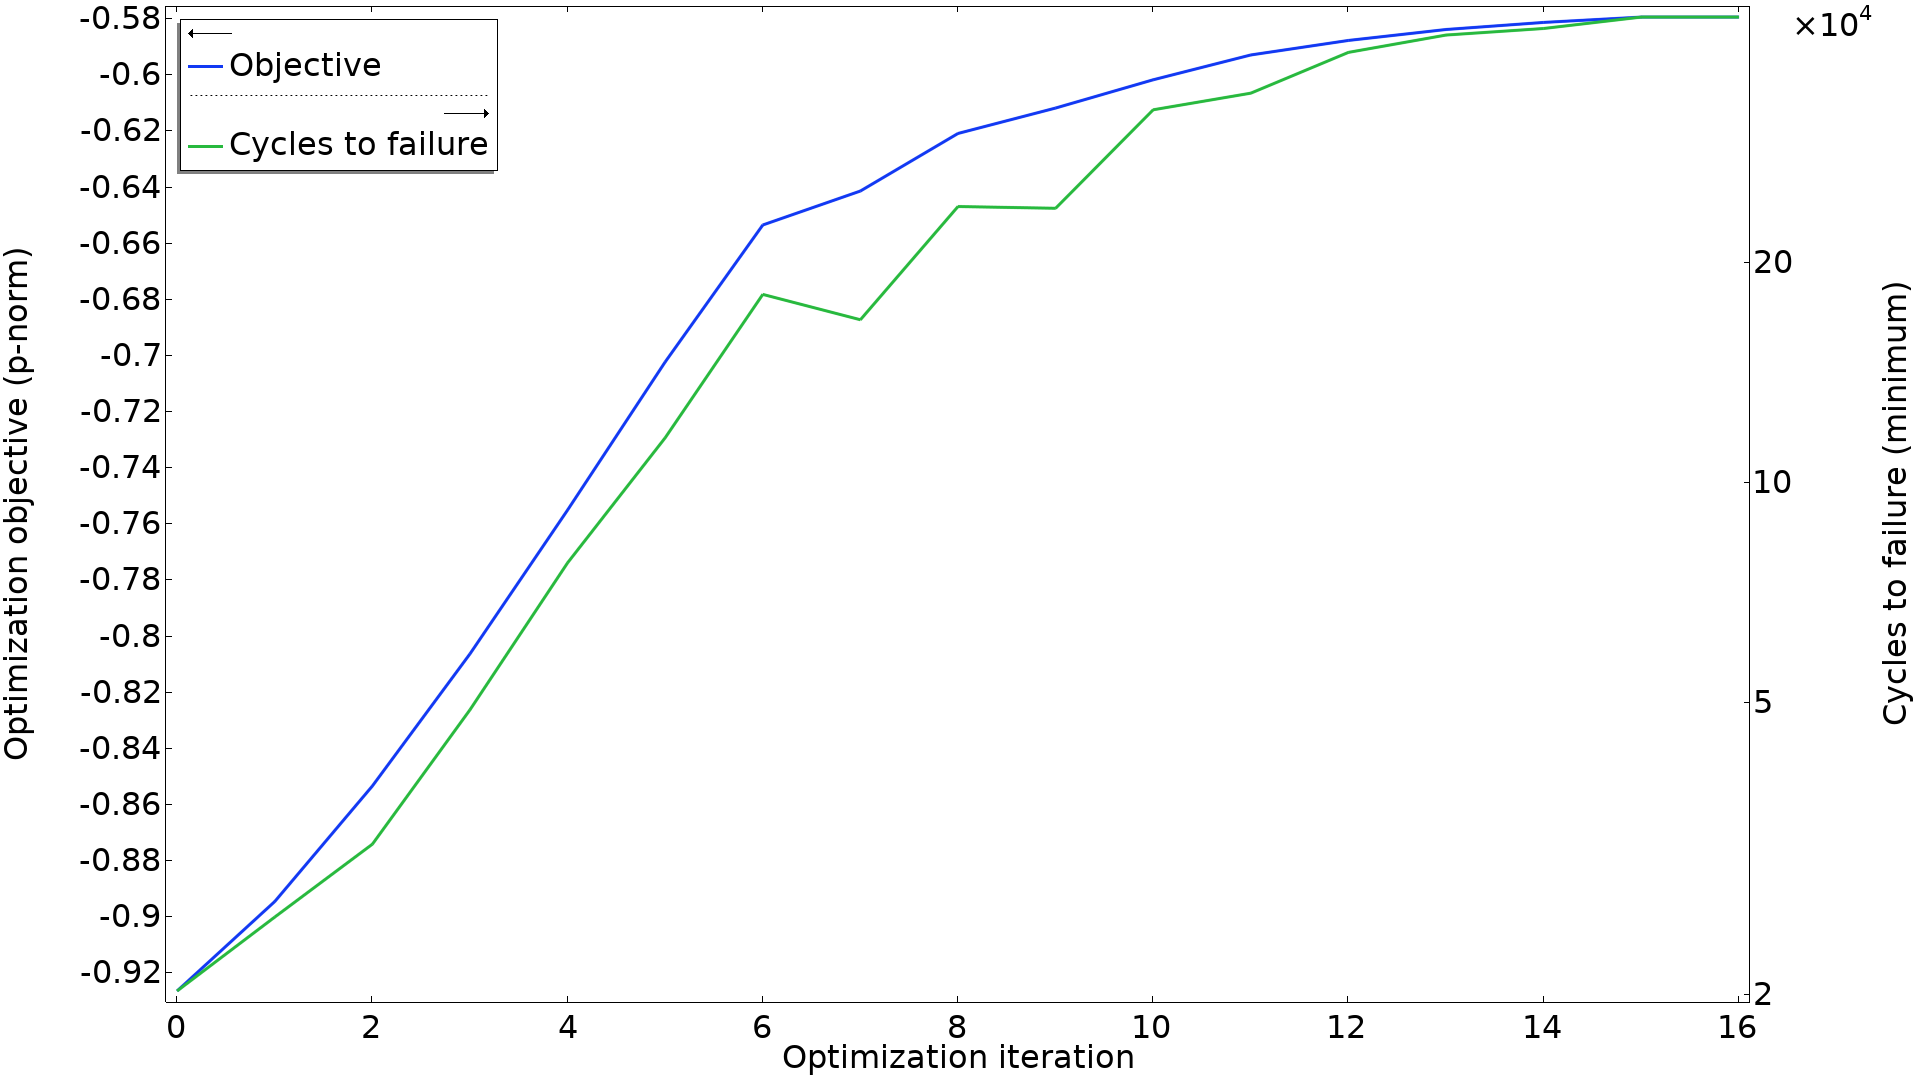 A 2D plot of the p-norm objective (blue line) and the minimum number of cycles to failure (green line) over the optimization iterations shows a strong correlation between the two.